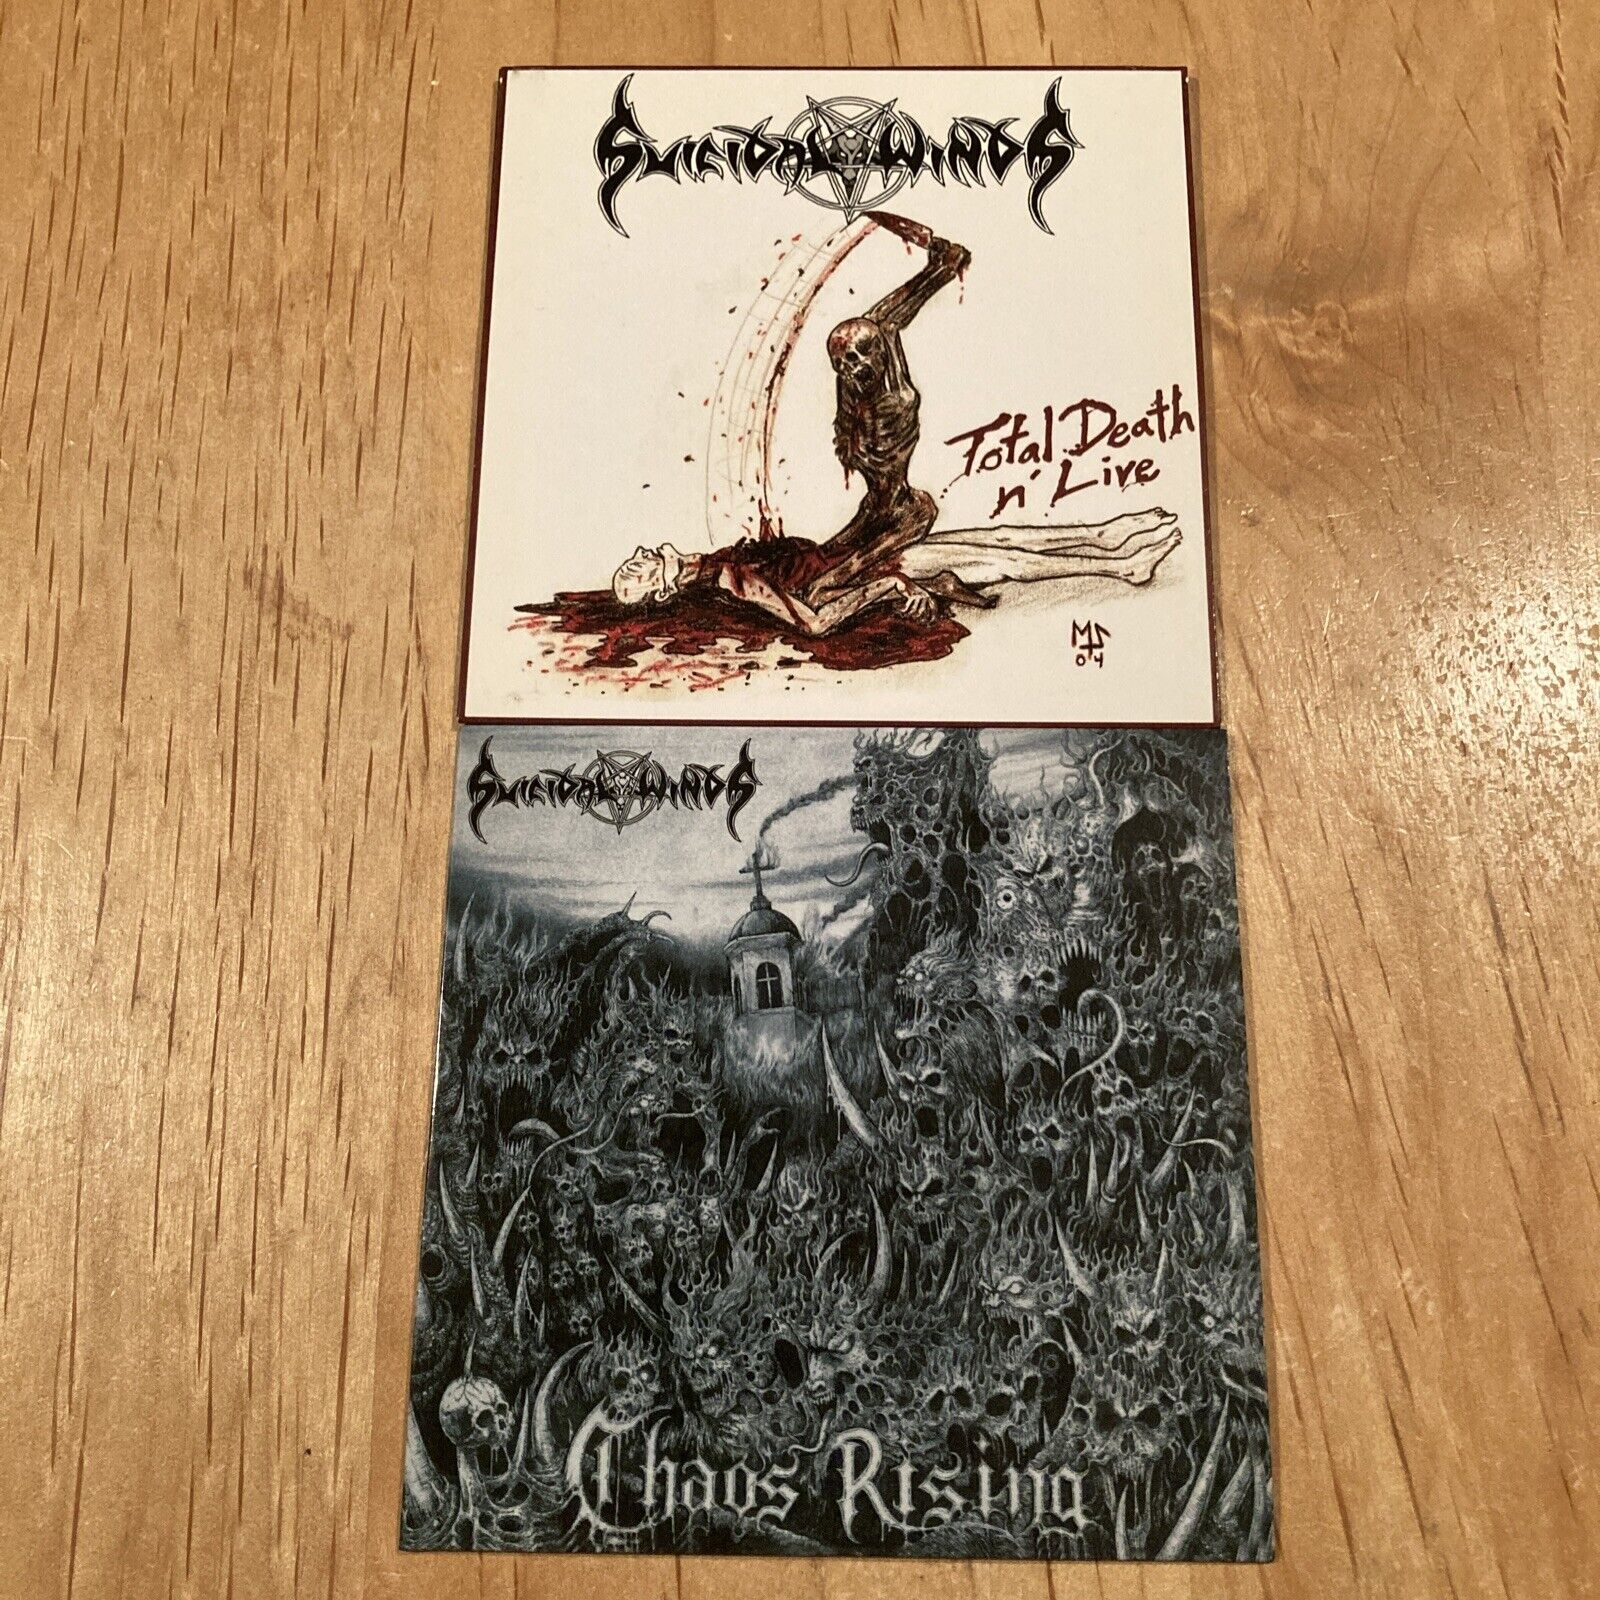 Suicidal Winds LOT Chaos Rising & Total Death n' Live goatwhore destroyer 666